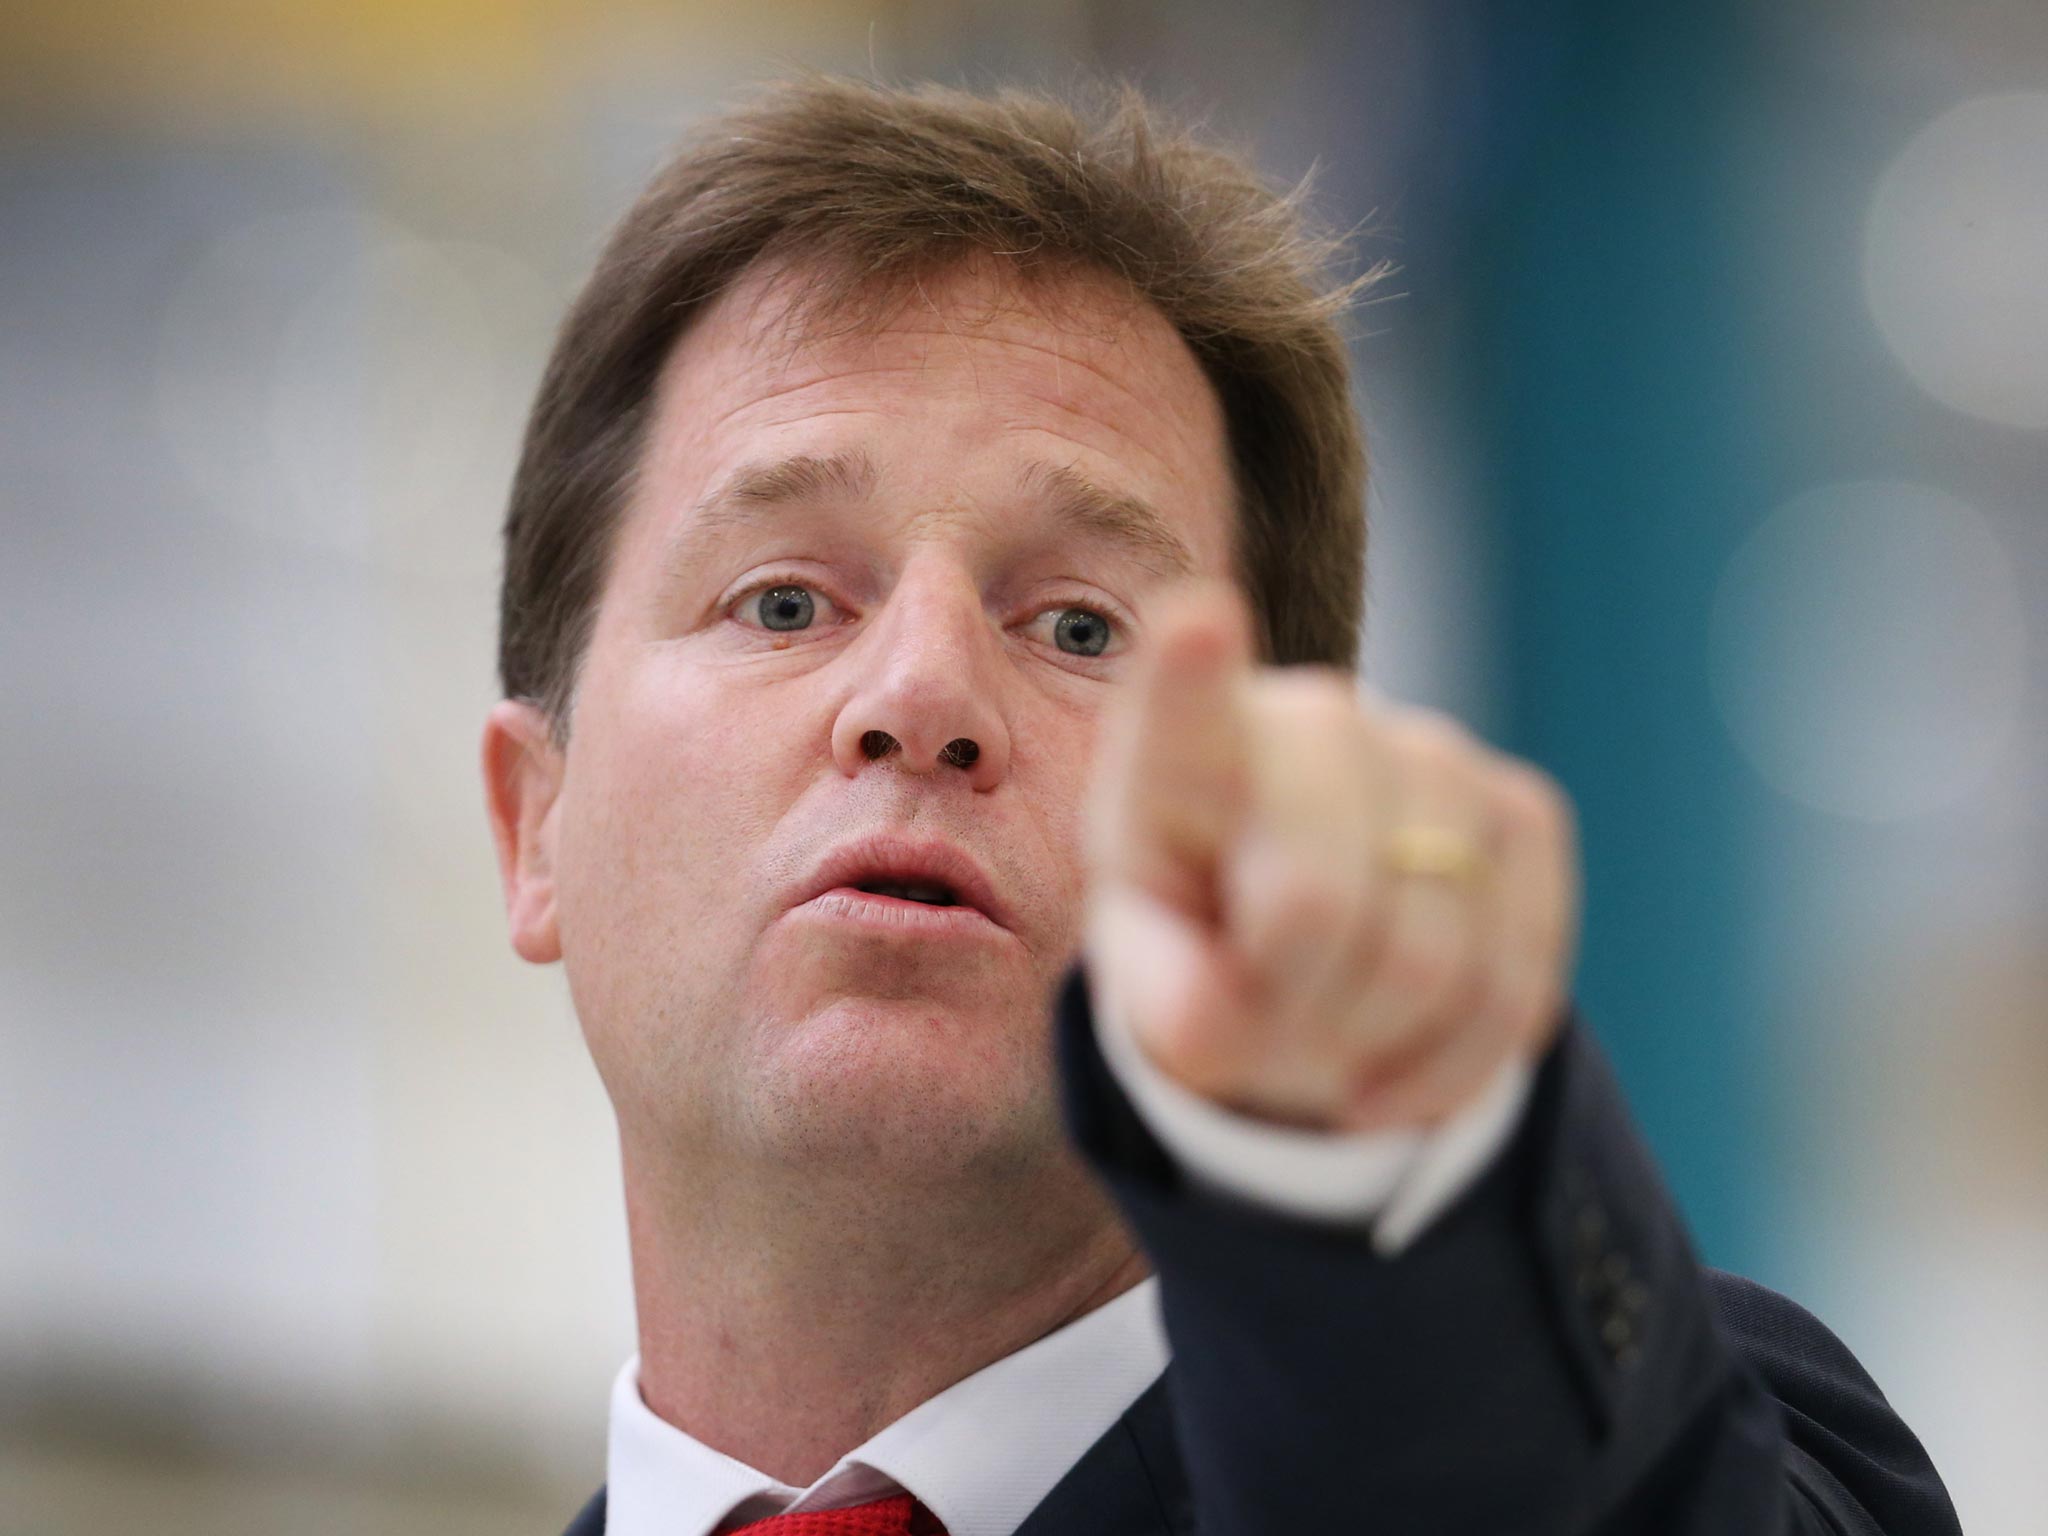 Nick Clegg rebutted Education Secretary Michael Gove's 'good Nick, bad Nick' comments on his LBC radio phone-in